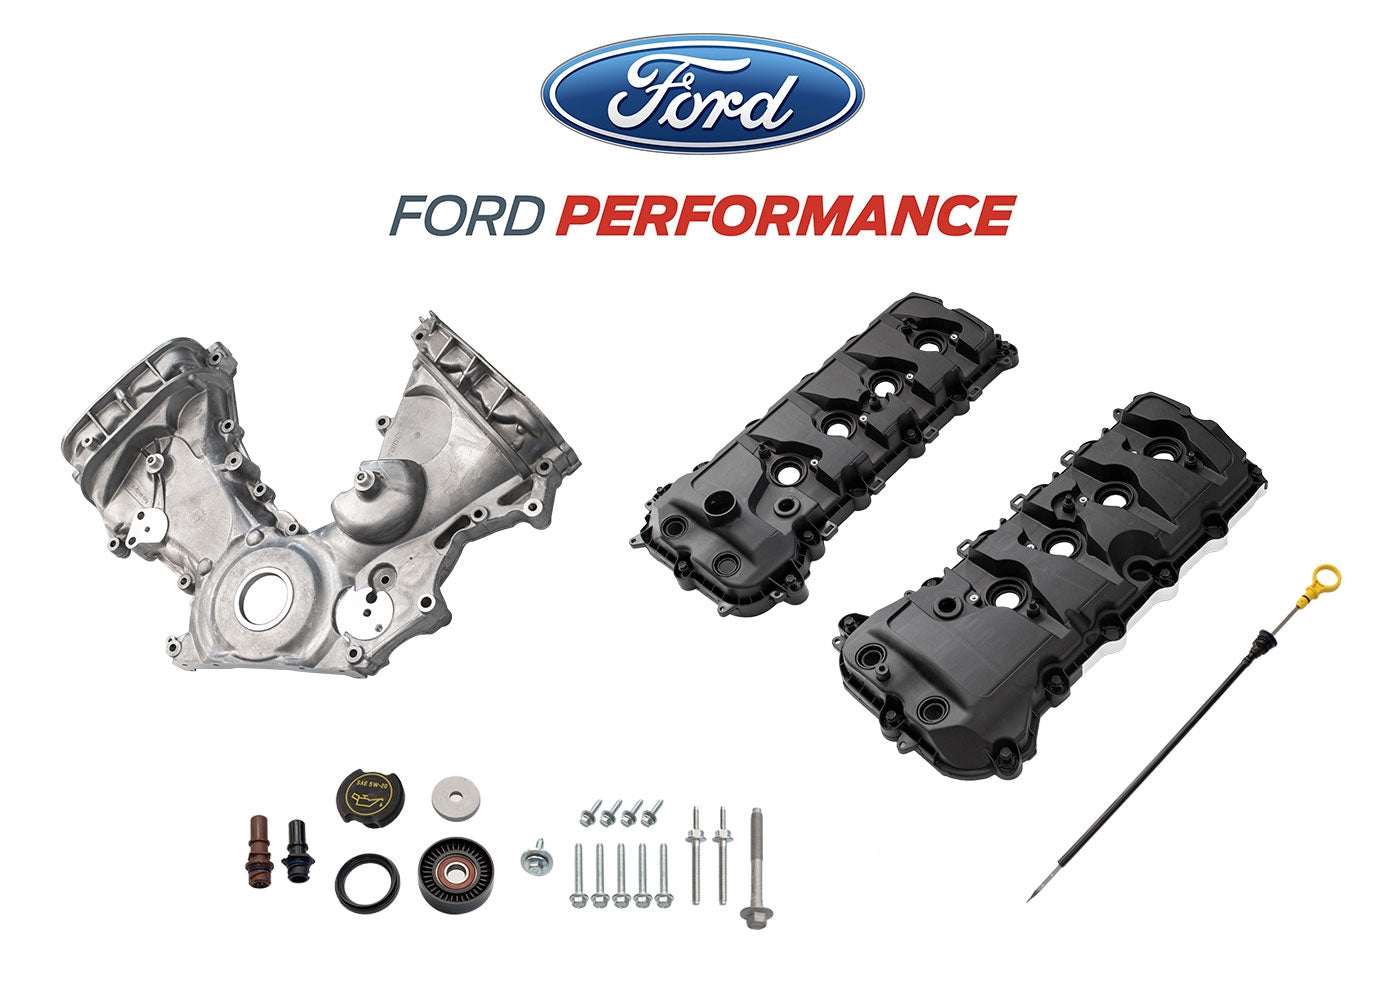 2011-2017 Mustang 5.0 Ford Performance M-6580-M50 Timing & Cam Engine Cover Kit